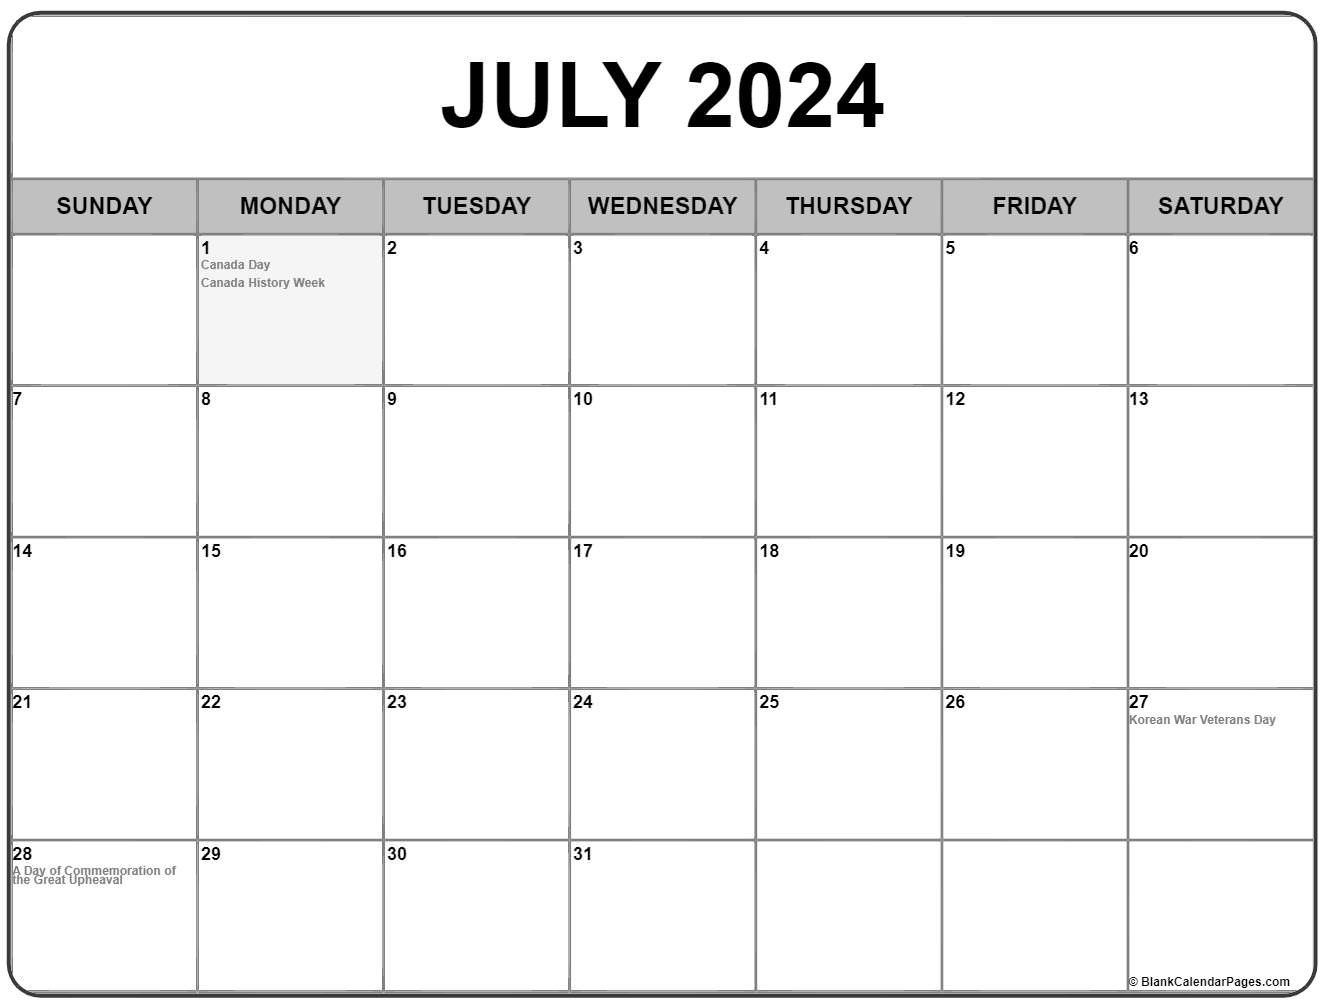 collection-of-july-2019-calendars-with-holidays